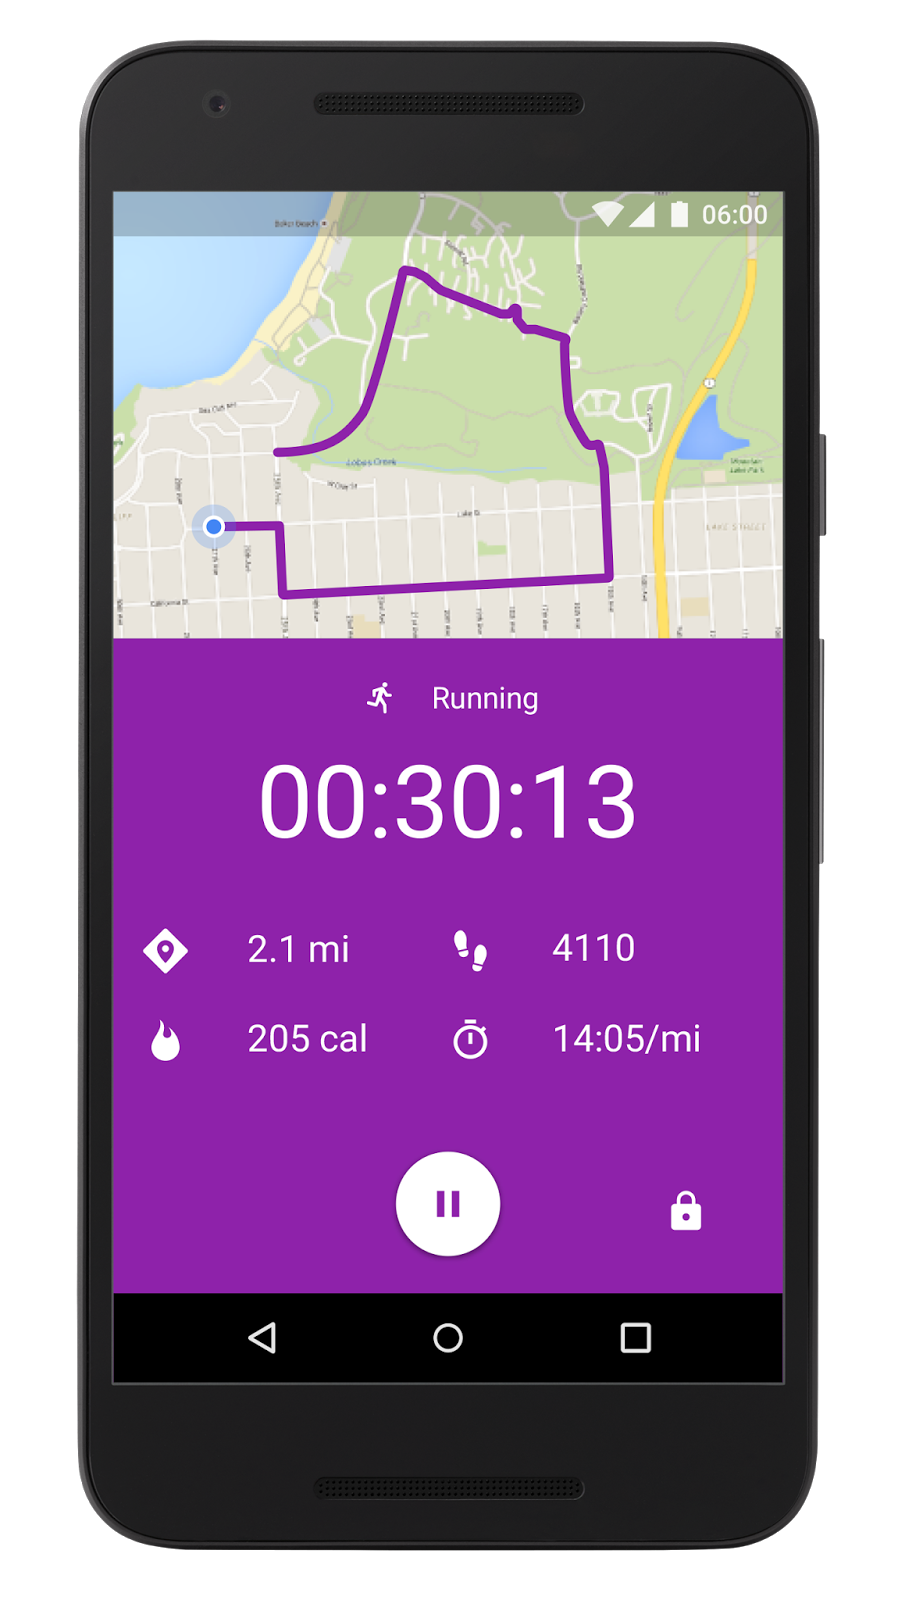 see mytracks historical data in google fit